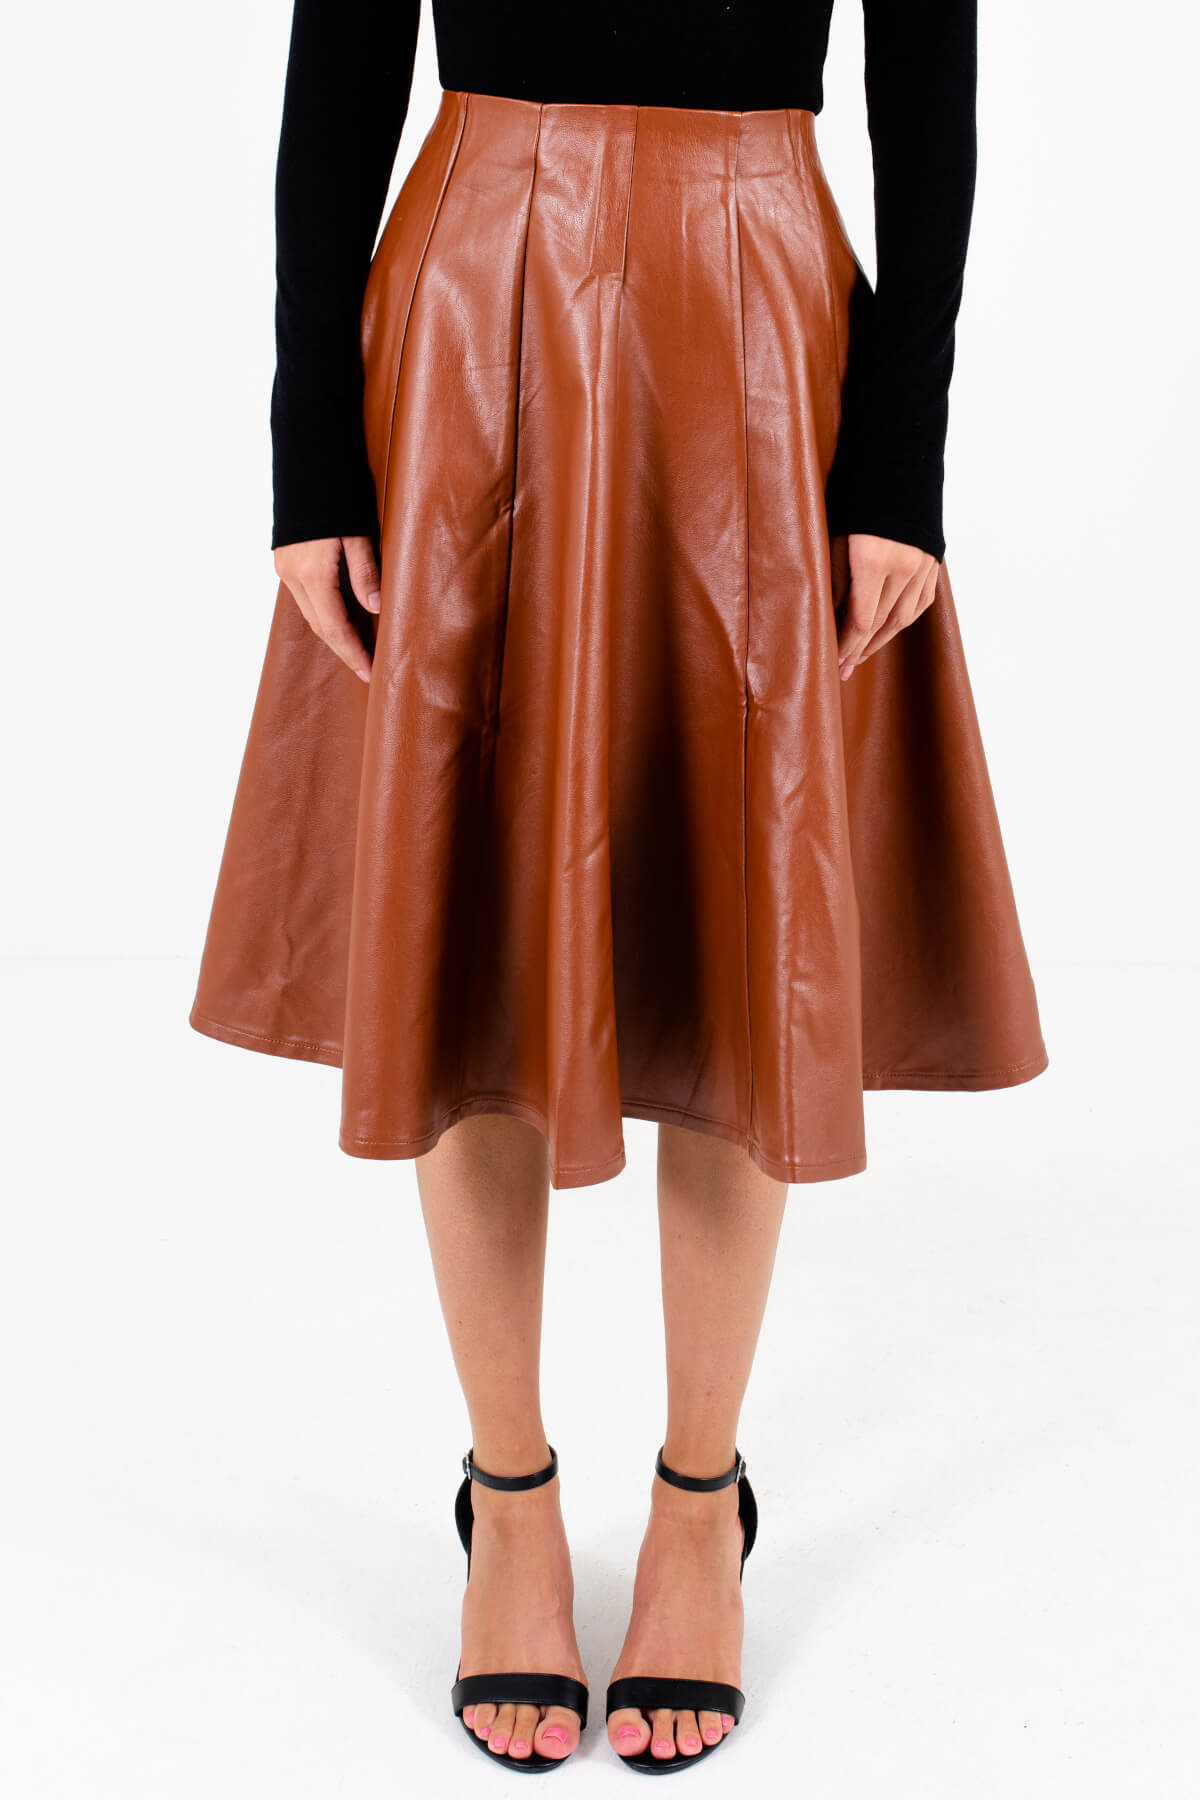 Brown Faux Leather Material Boutique Skirts for Women